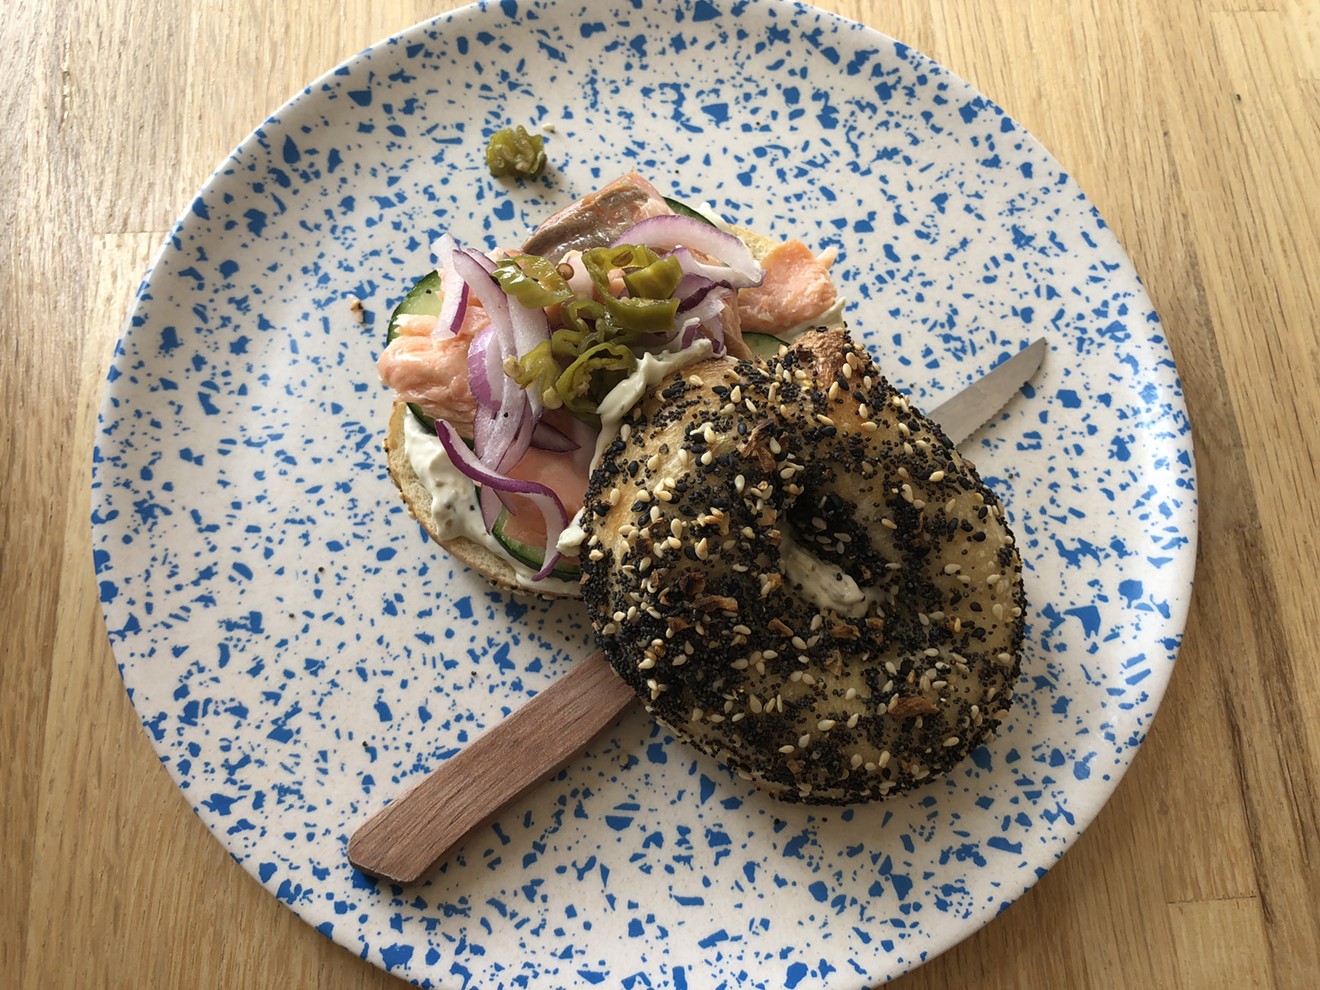 A bagel from Super Chunk